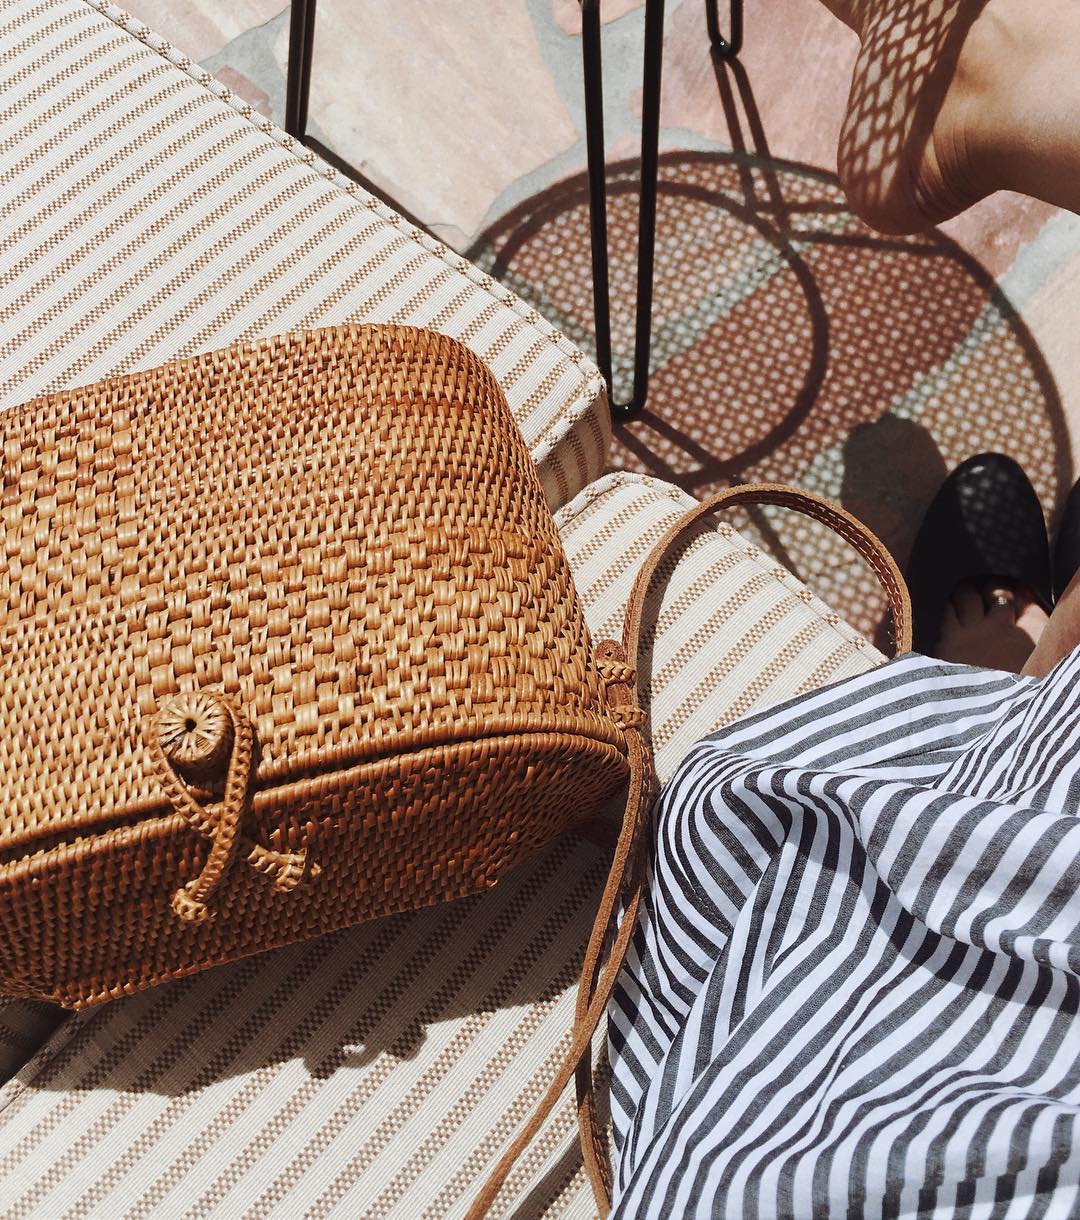 Cute Straw Beach Bags - Straw Beach Bags Are Our Current Summer Obsession